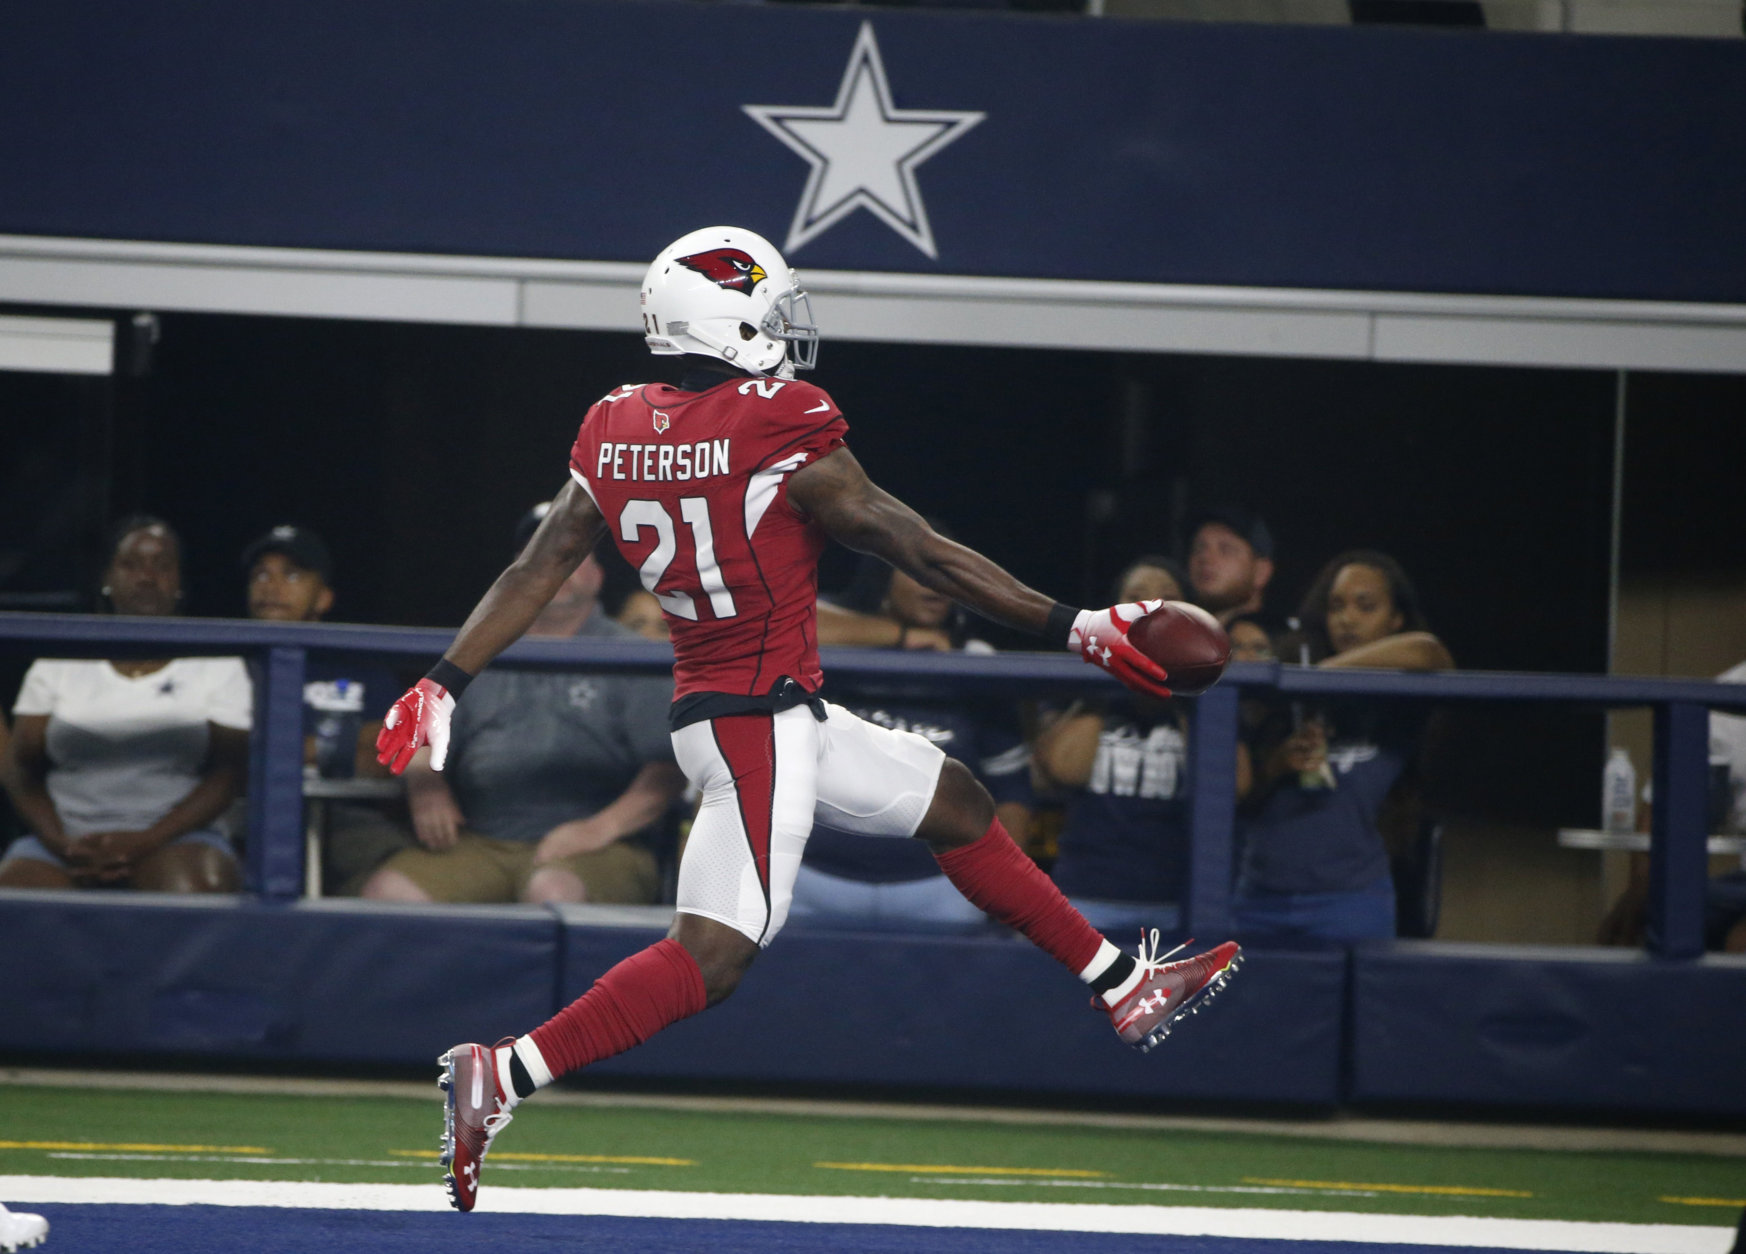 Arizona Cardinals defensive back Patrick Peterson (21) scores a touchdown after making an interception against the Dallas Cowboys during the first half of a preseason NFL football game in Arlington, Texas, Sunday, Aug. 26, 2018. (AP Photo/Michael Ainsworth)